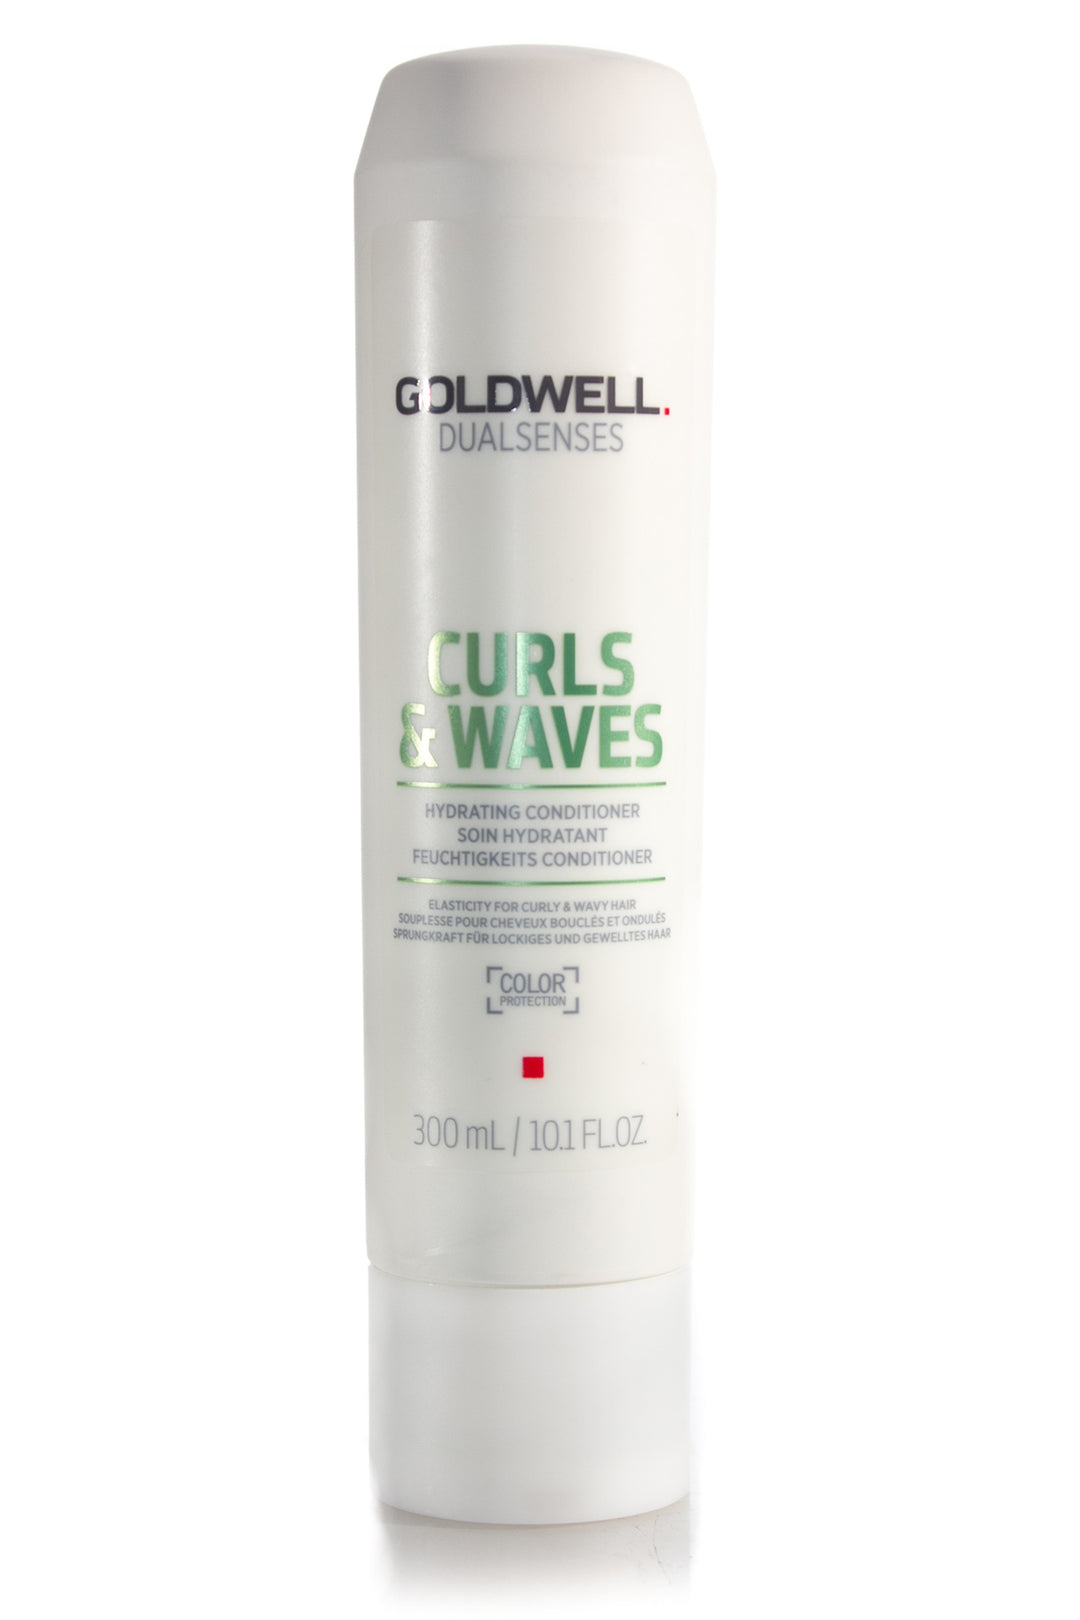 goldwell-dual-senses-curls-&-waves-hydrating-conditioner-300ml